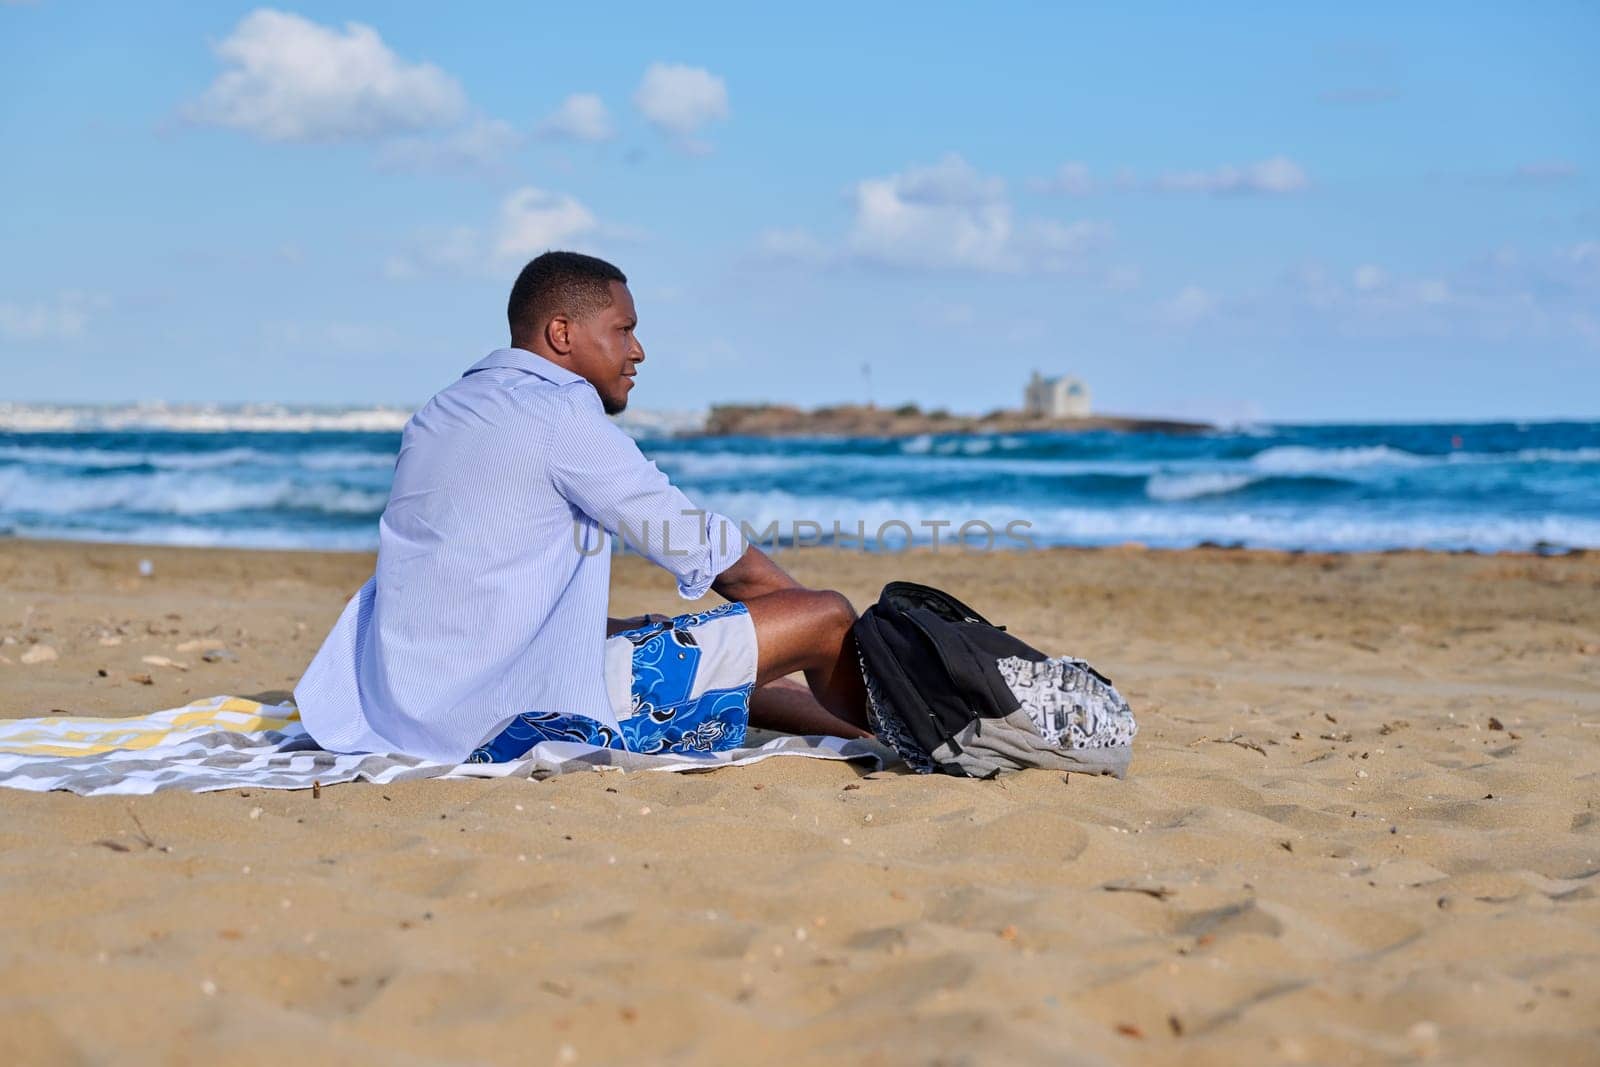 Young positive male tourist sitting resting on beach, copy space. Smiling African American male 30 years old sitting on sand, sea nature background. Lifestyle, travel, tourism, people concept